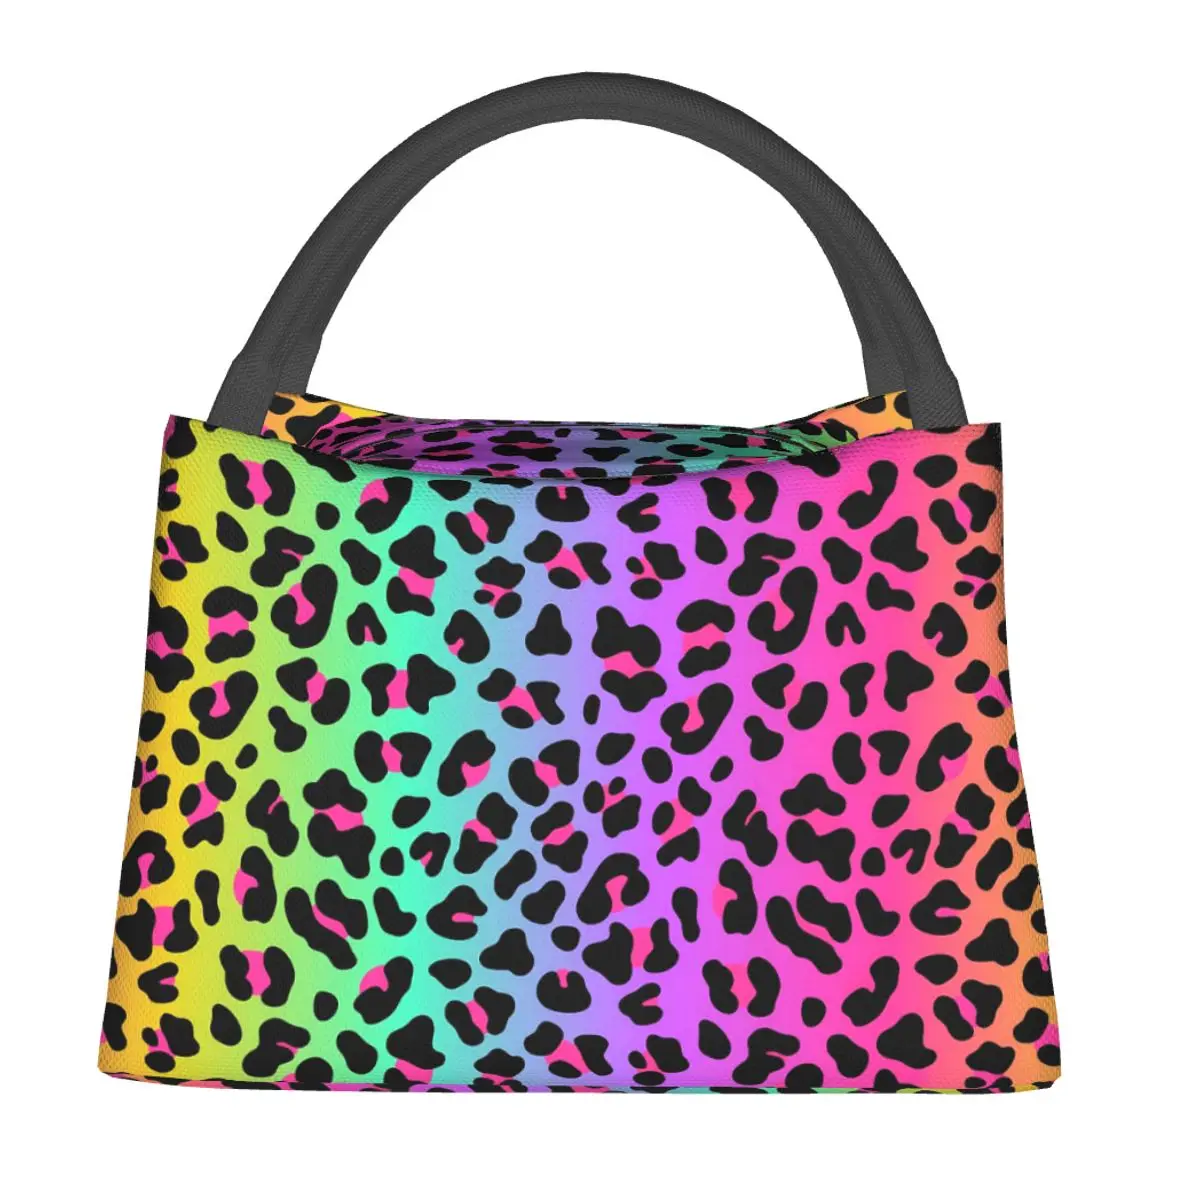 

Rainbow Leopard Lunch Bag Cheetah Neon Print Portable Lunch Box Outdoor Picnic Design Cooler Bag Vintage Oxford Tote Food Bags